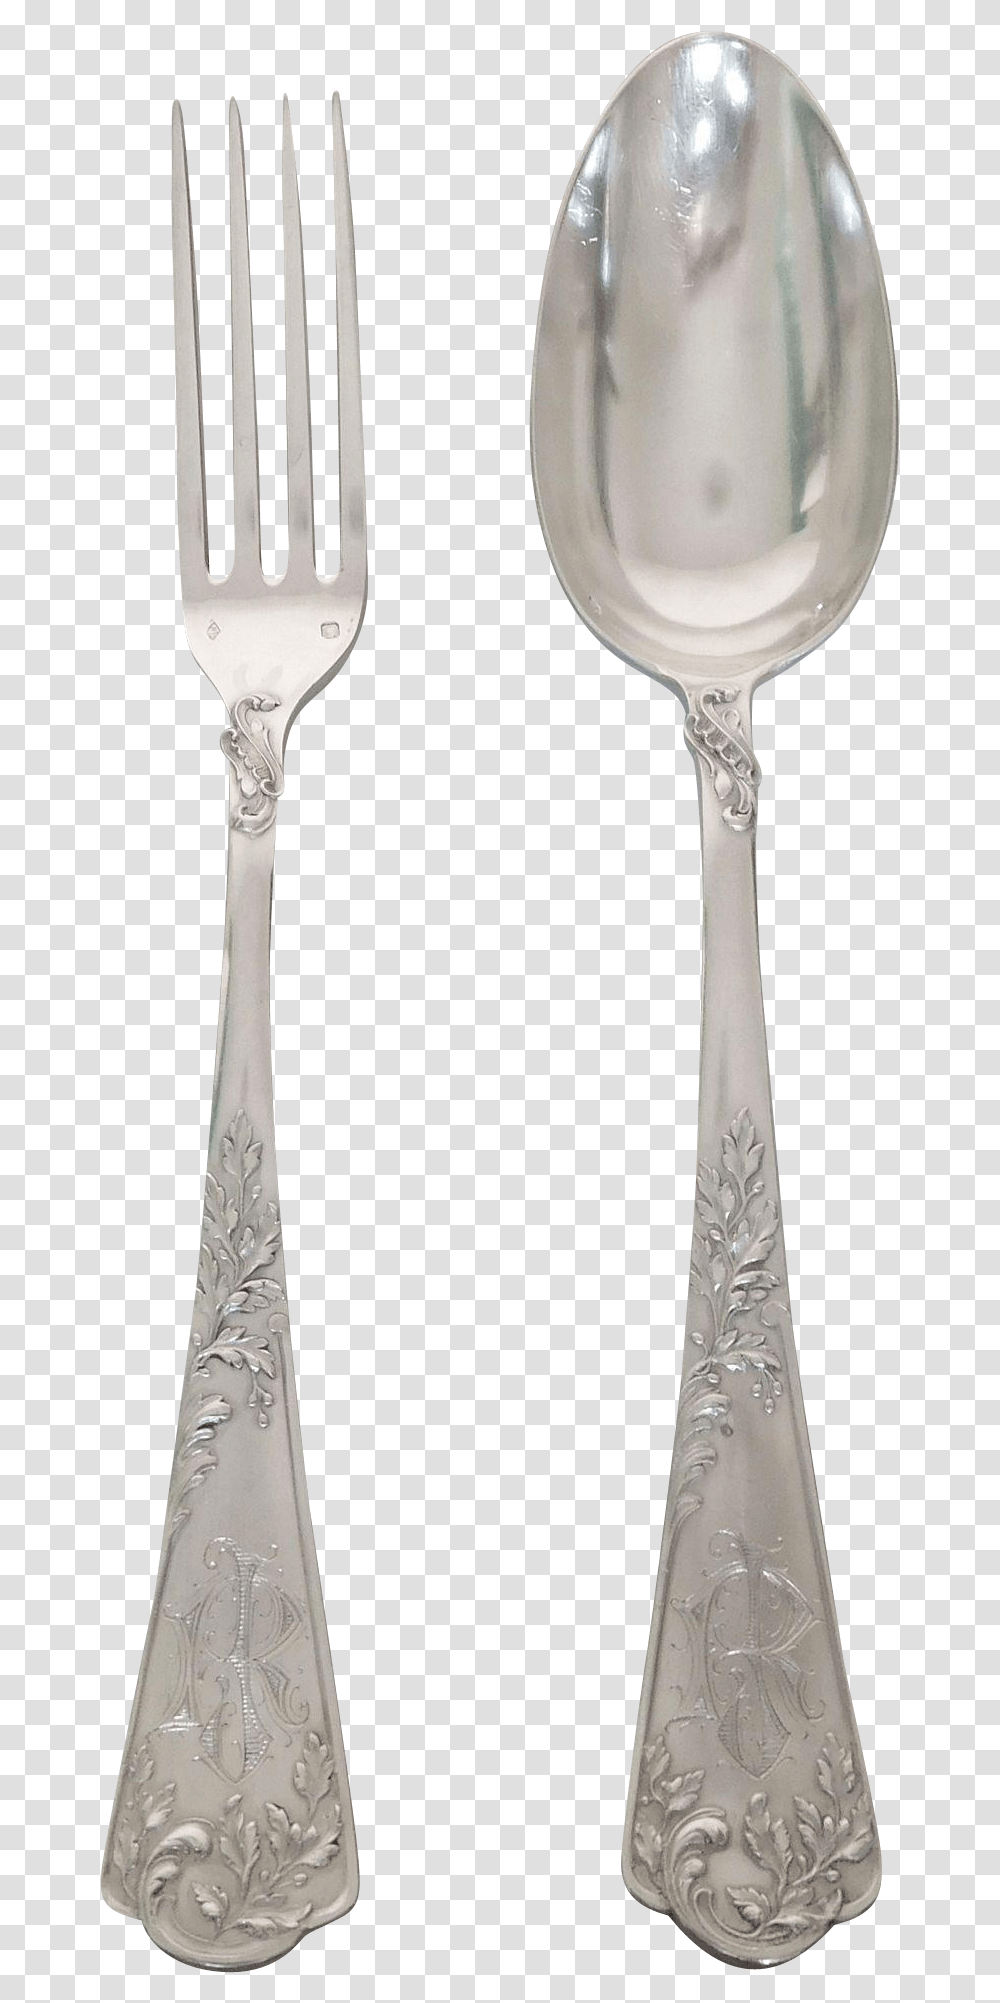 Silver Fork Image With Background Spoon And Fork, Cutlery, Architecture, Building, Metropolis Transparent Png